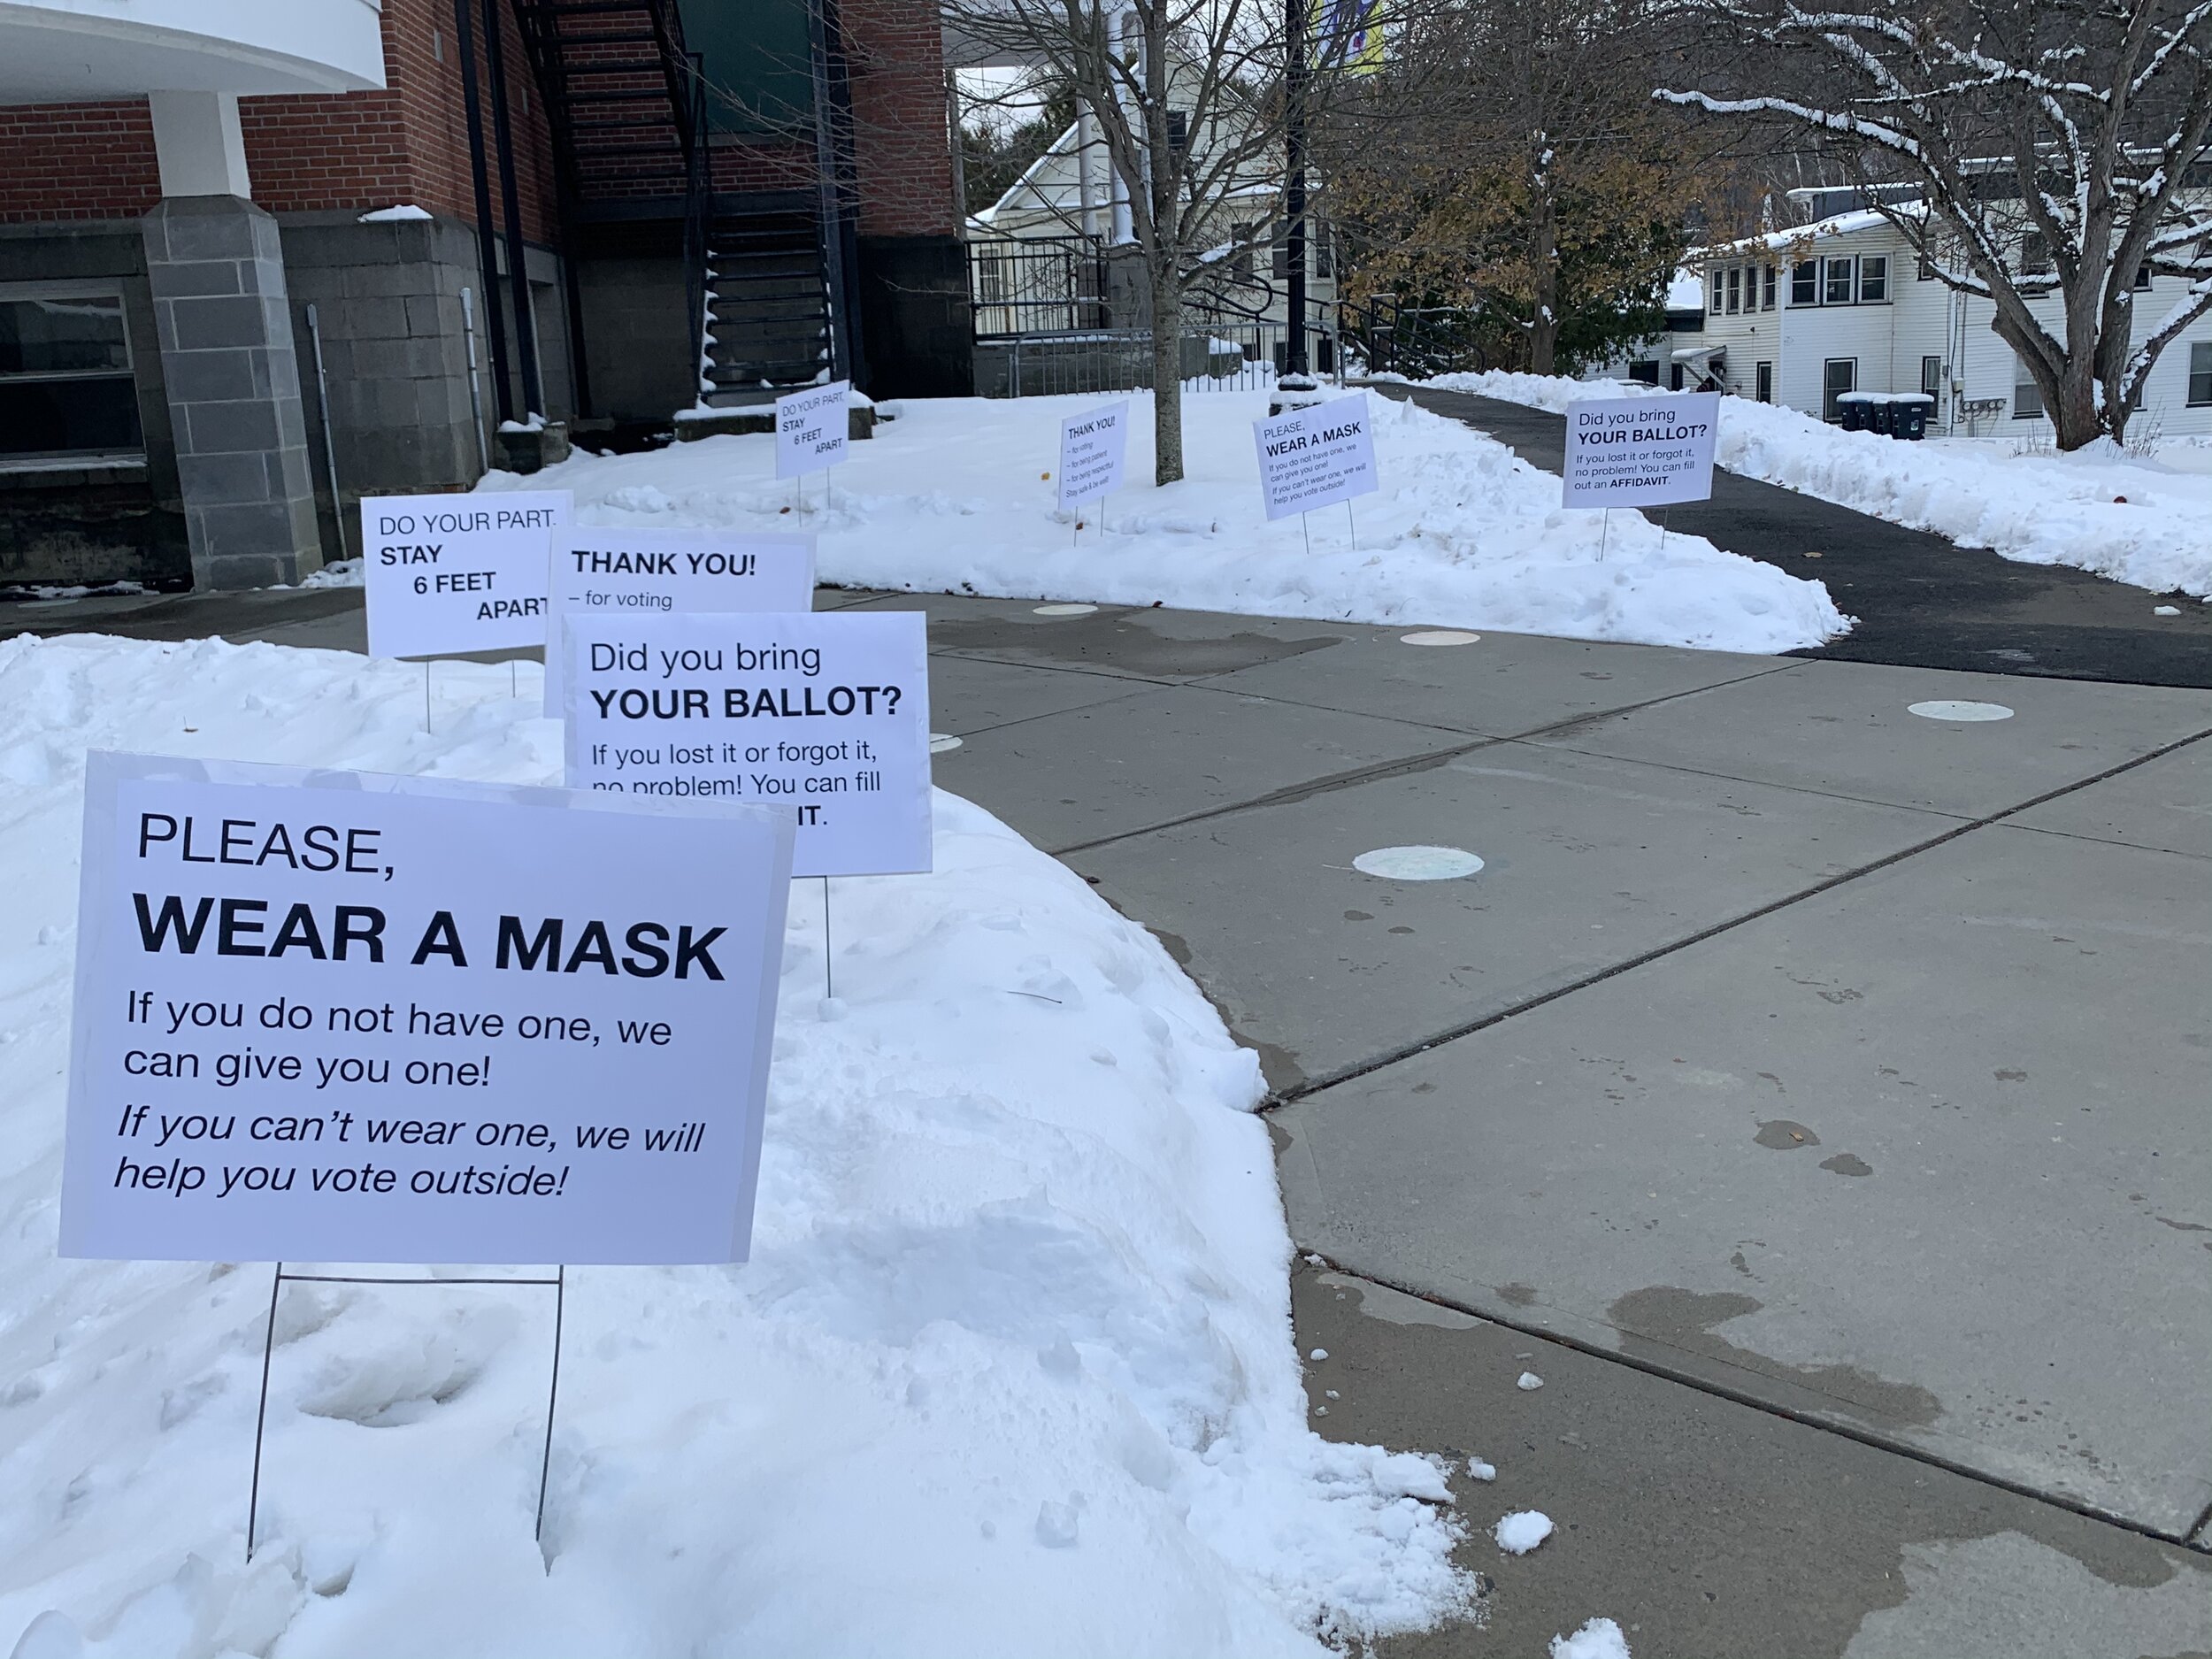   Impacts of COVID-19 ripple through election day with reminders to distance and wear masks, etc. popping out of the fresh snowbanks outside Thatcher Brook Primary School Tuesday. Photo by Lisa Scagliotti.  